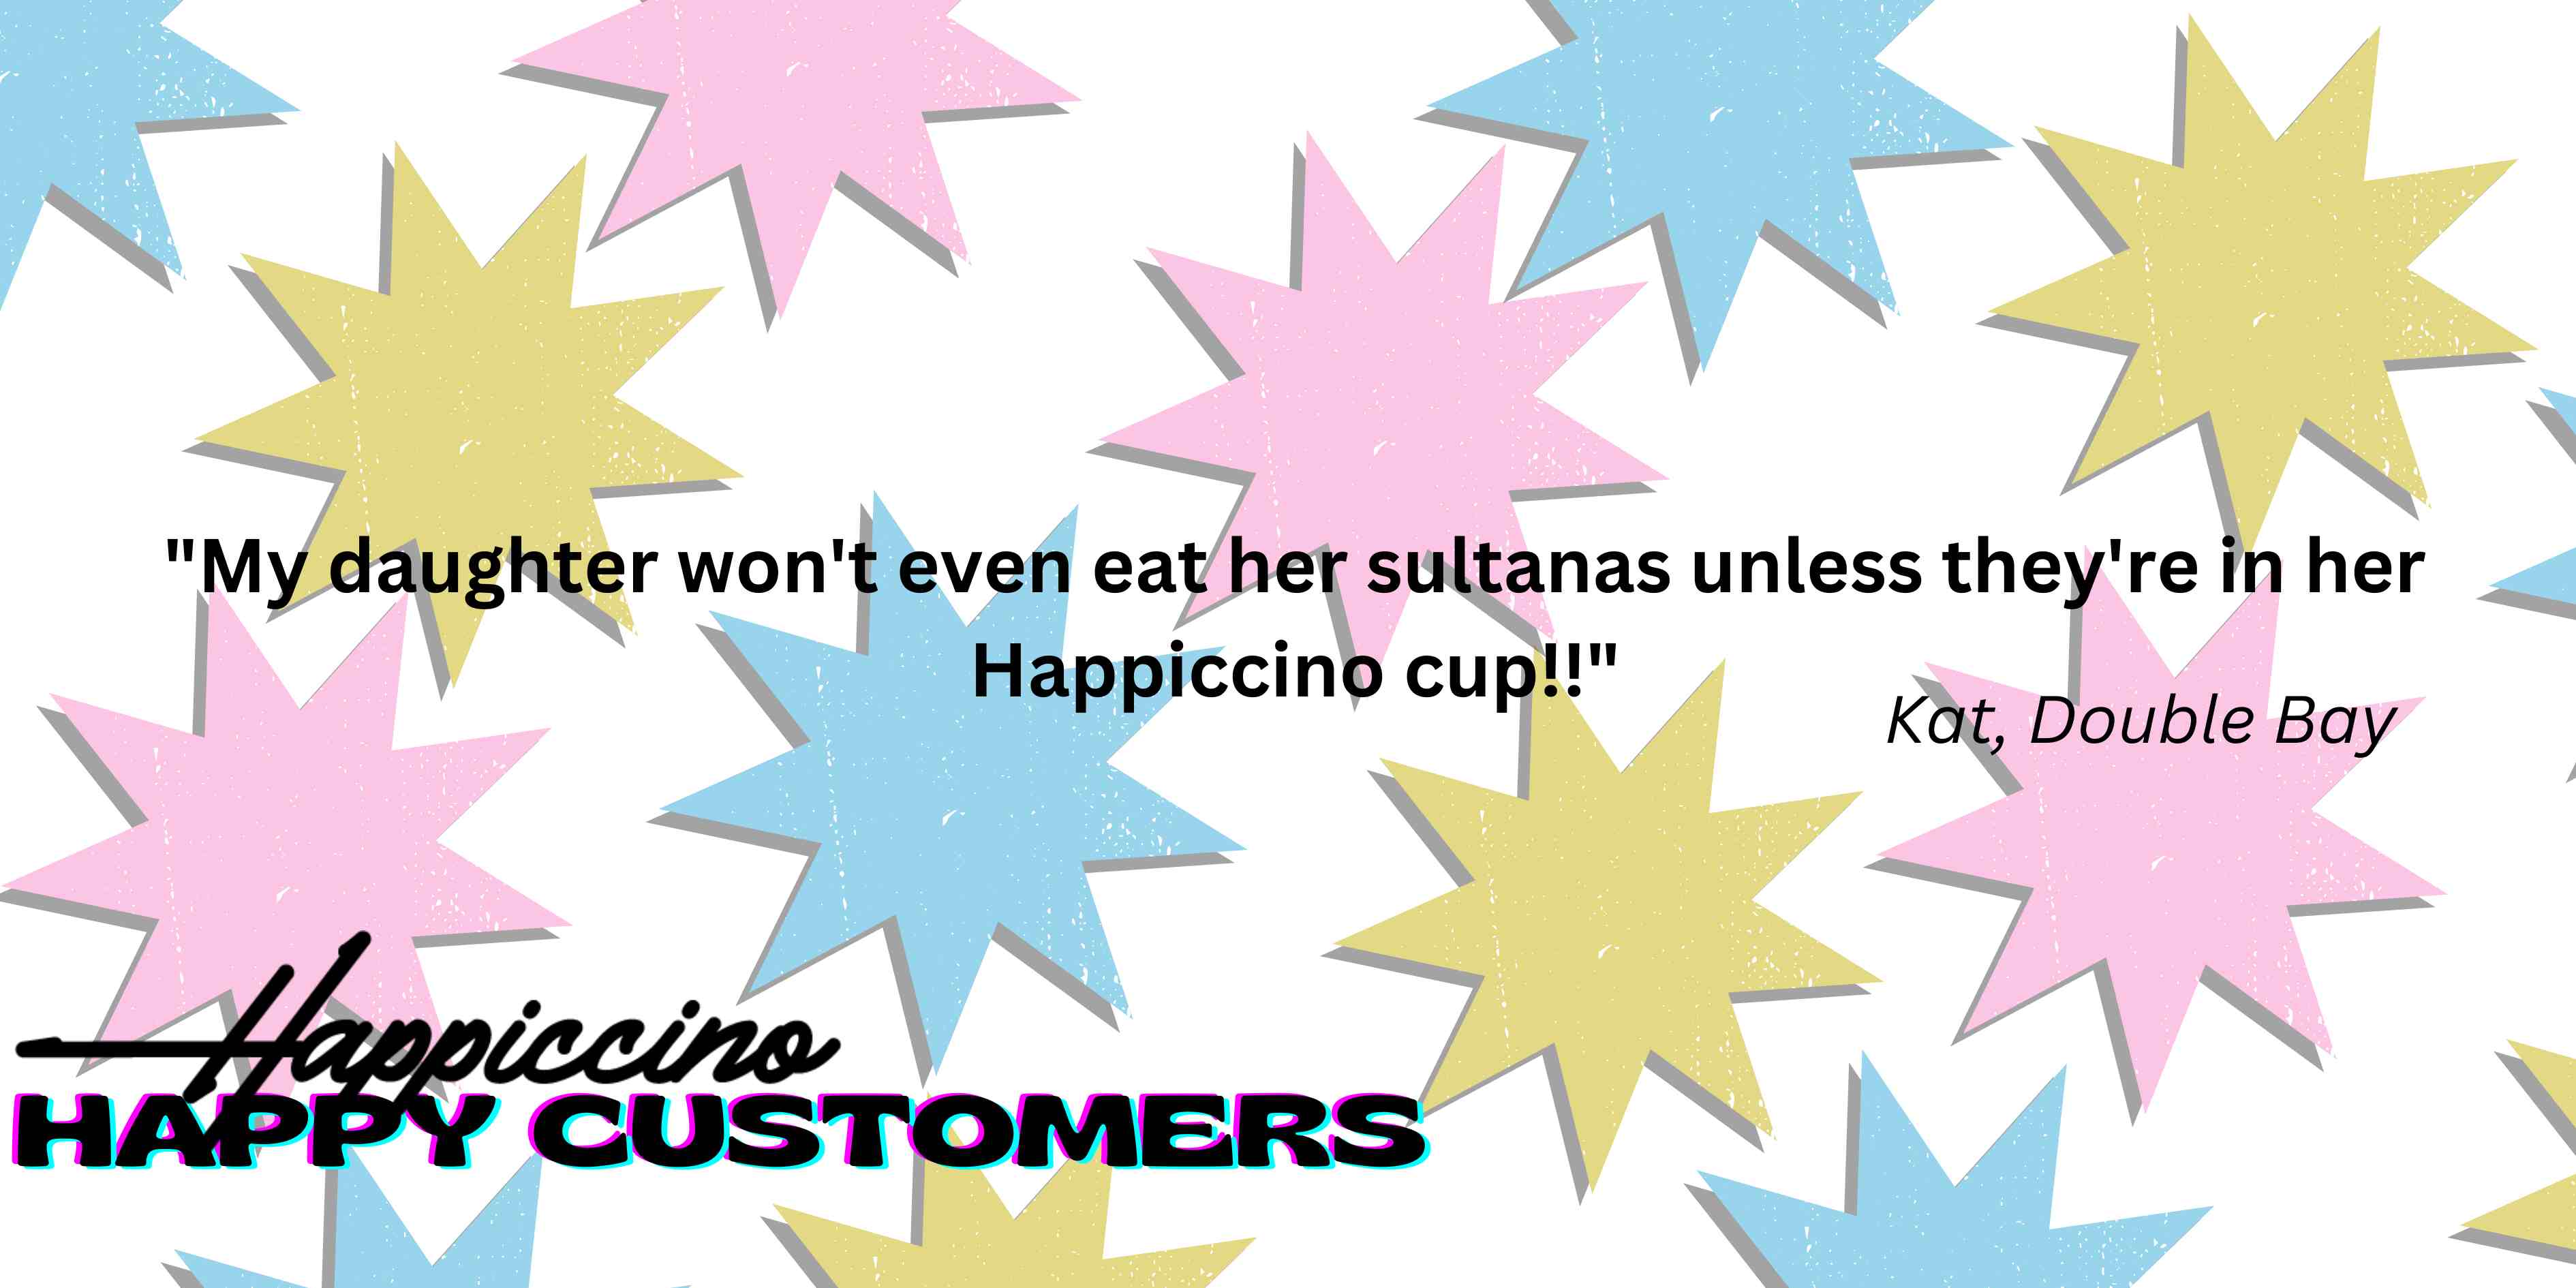 My daughter loves her Happiccino cup!